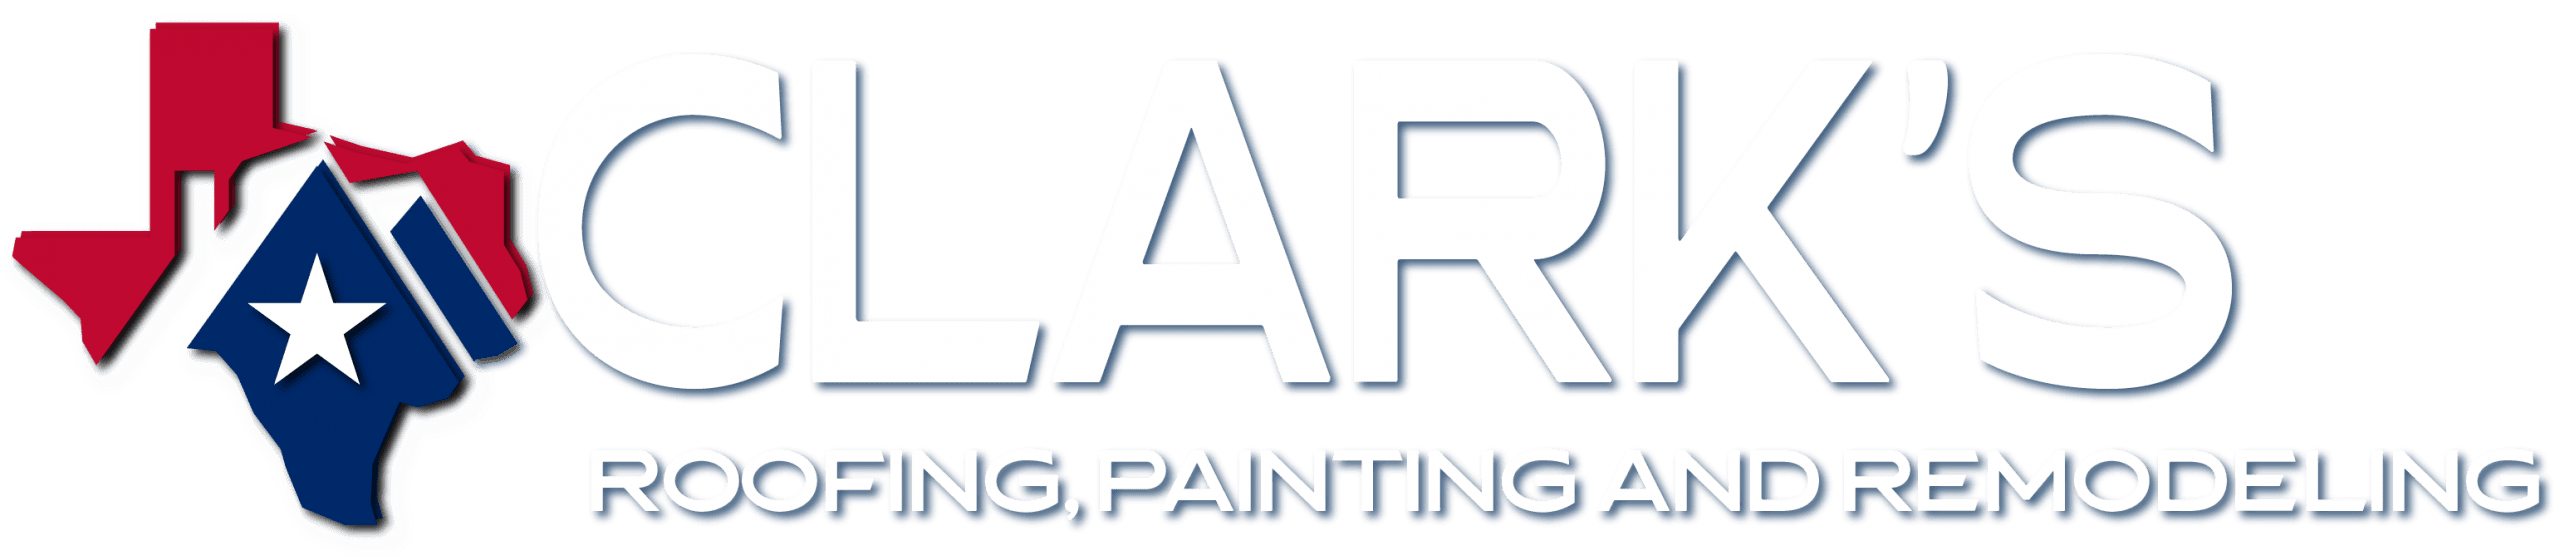 Clark's Roofing Painting and Remodeling